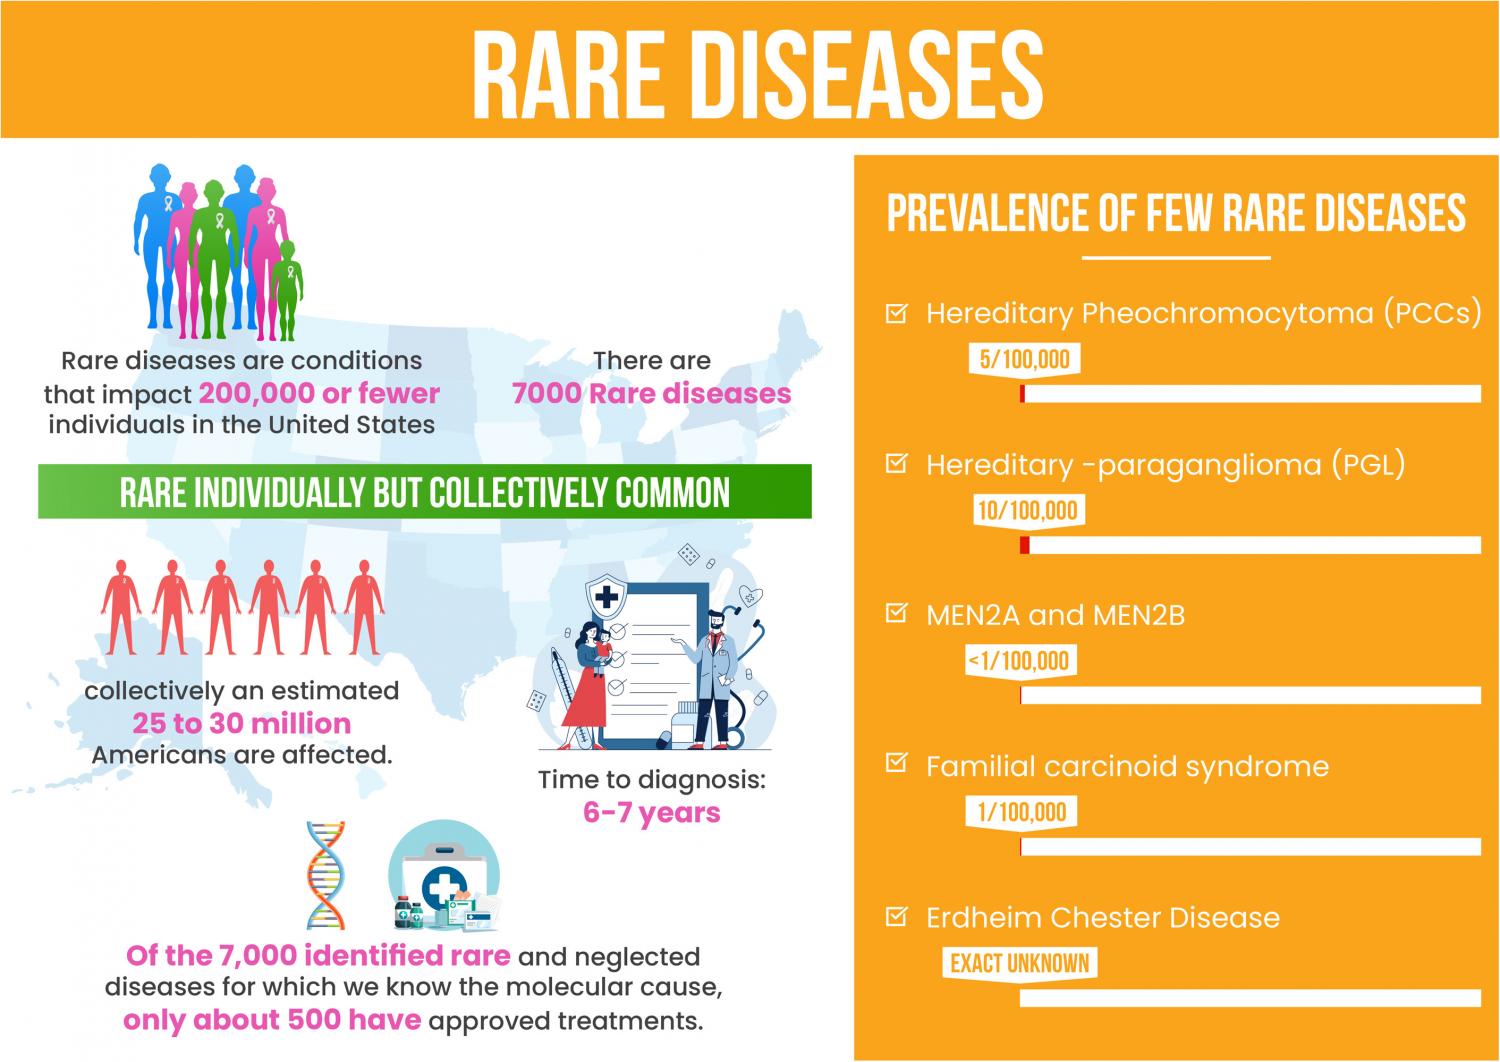 Statistics related to the epidemiology of RDs and the importance of early diagnosis.